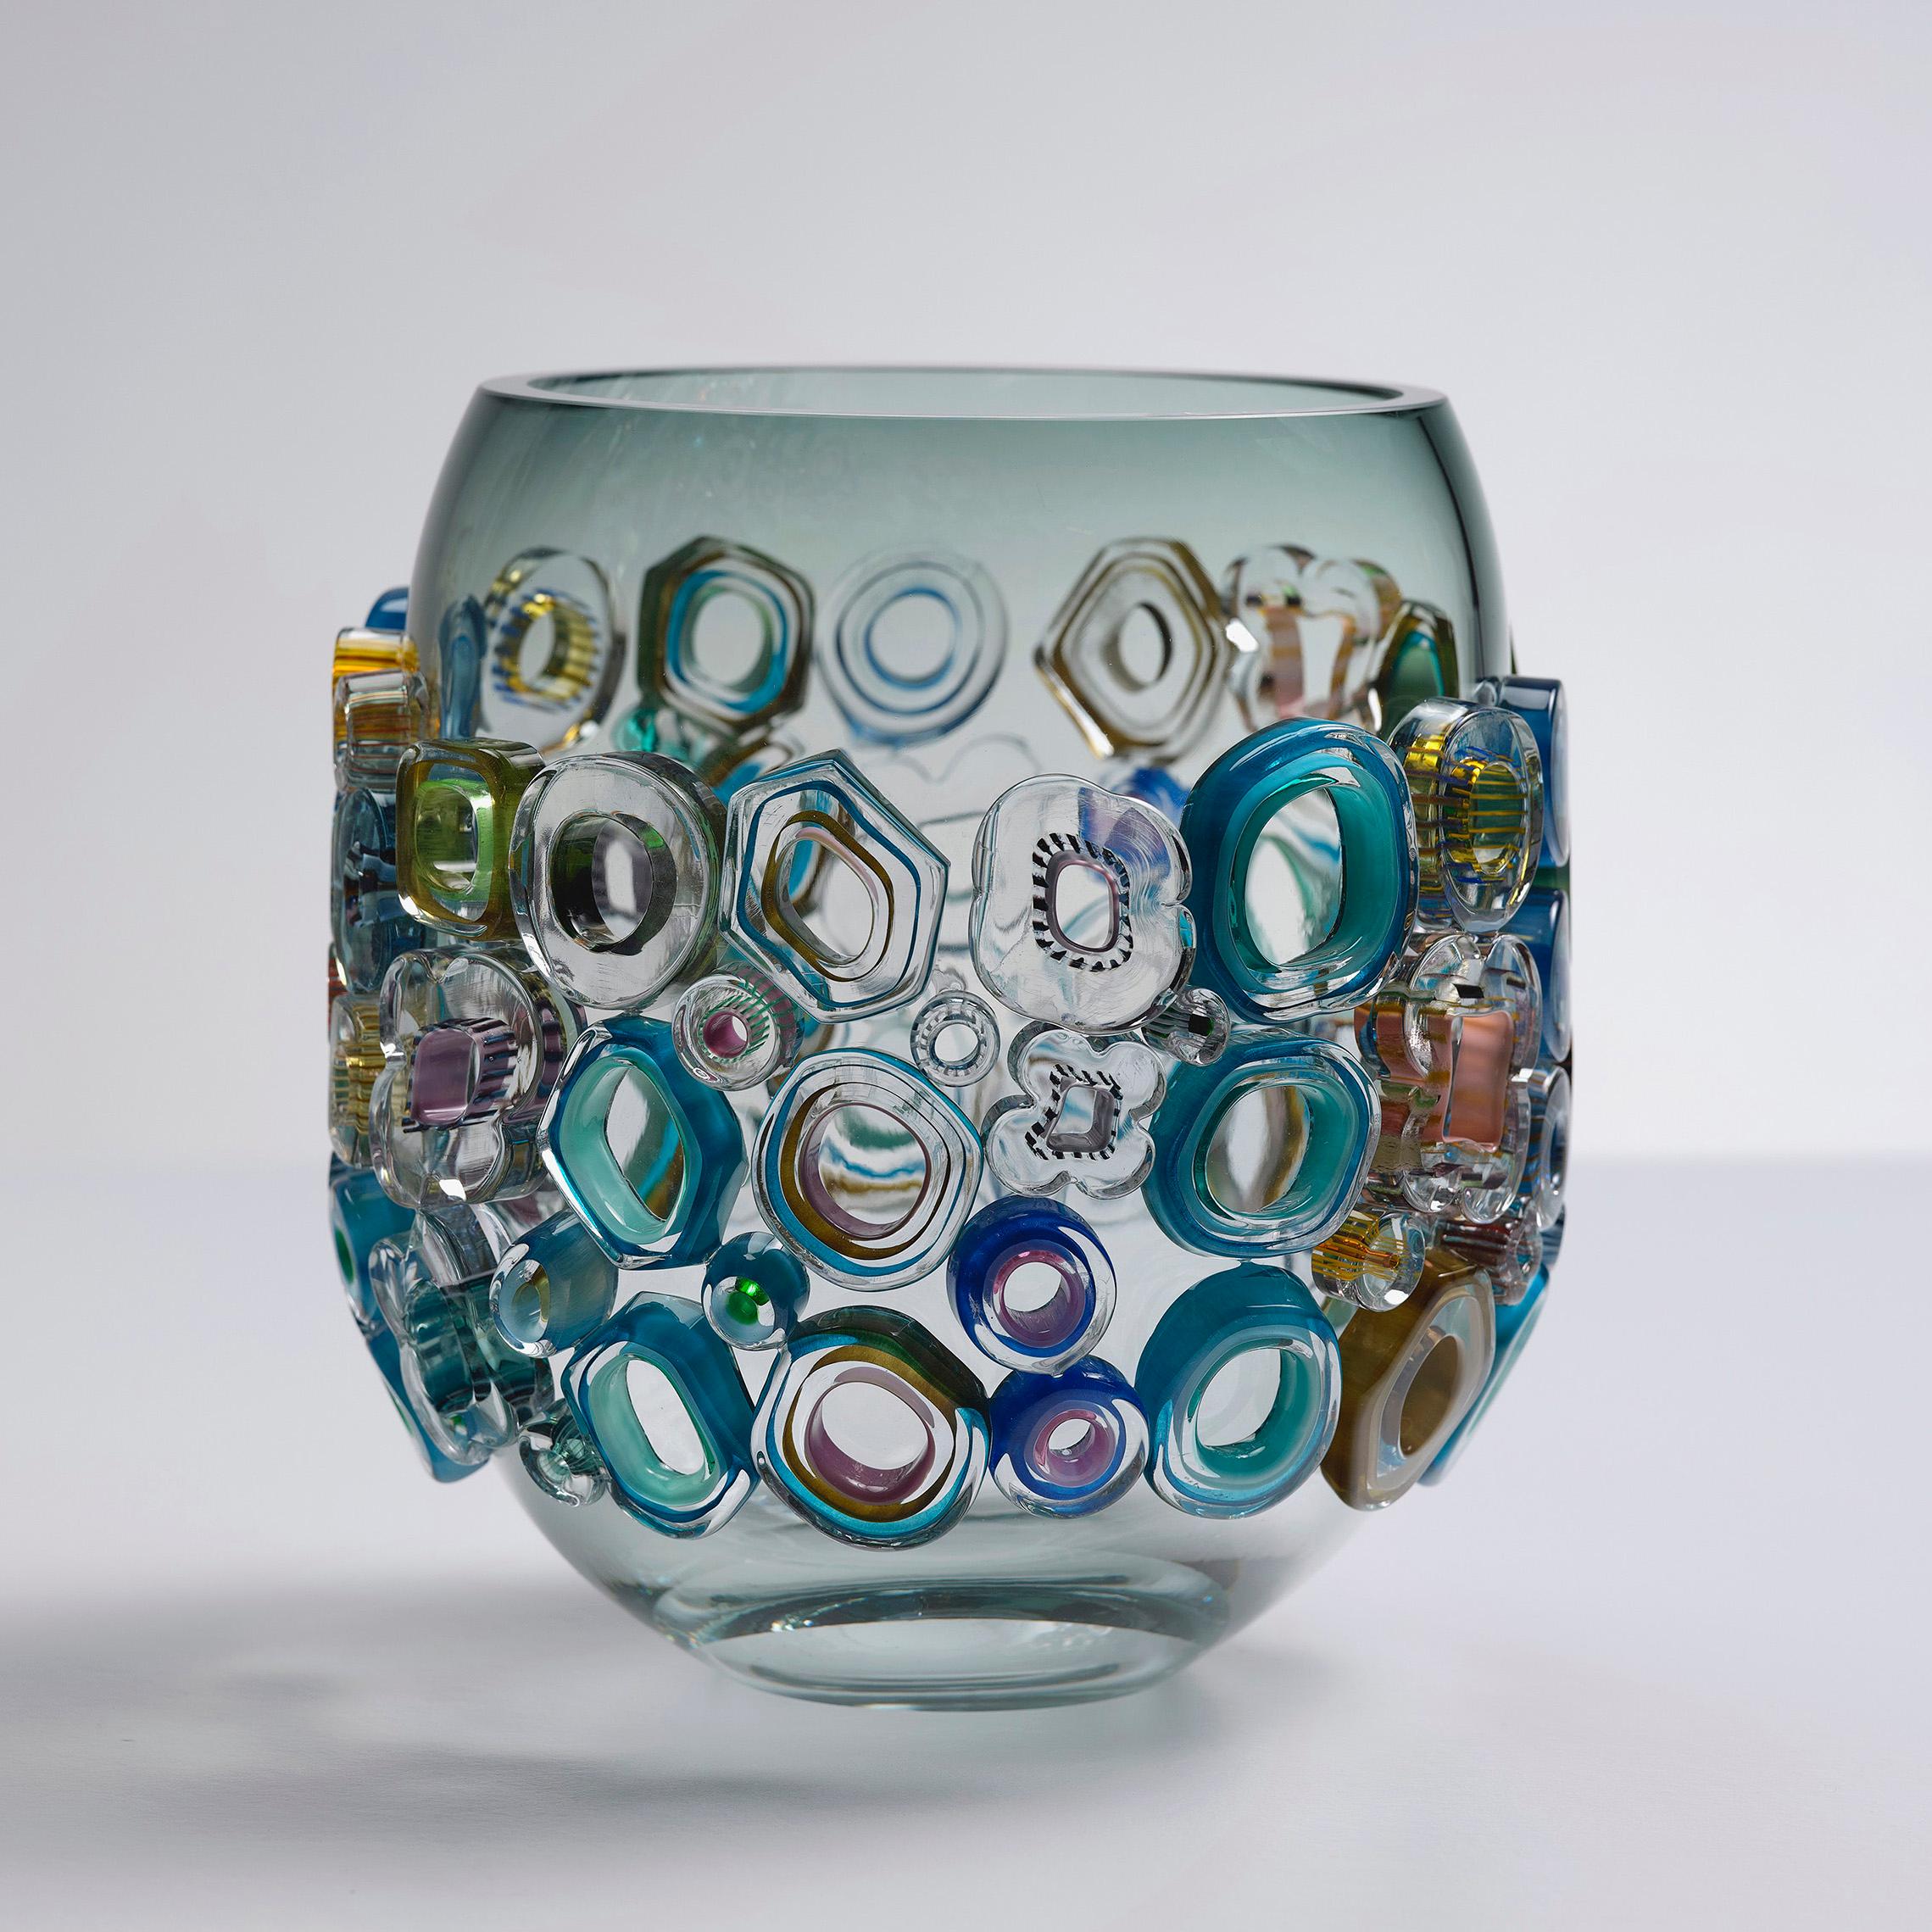 Hand-Crafted Common Ray Blue Green with Green Diamonds, a Unique Glass Vase by Sabine Lintzen